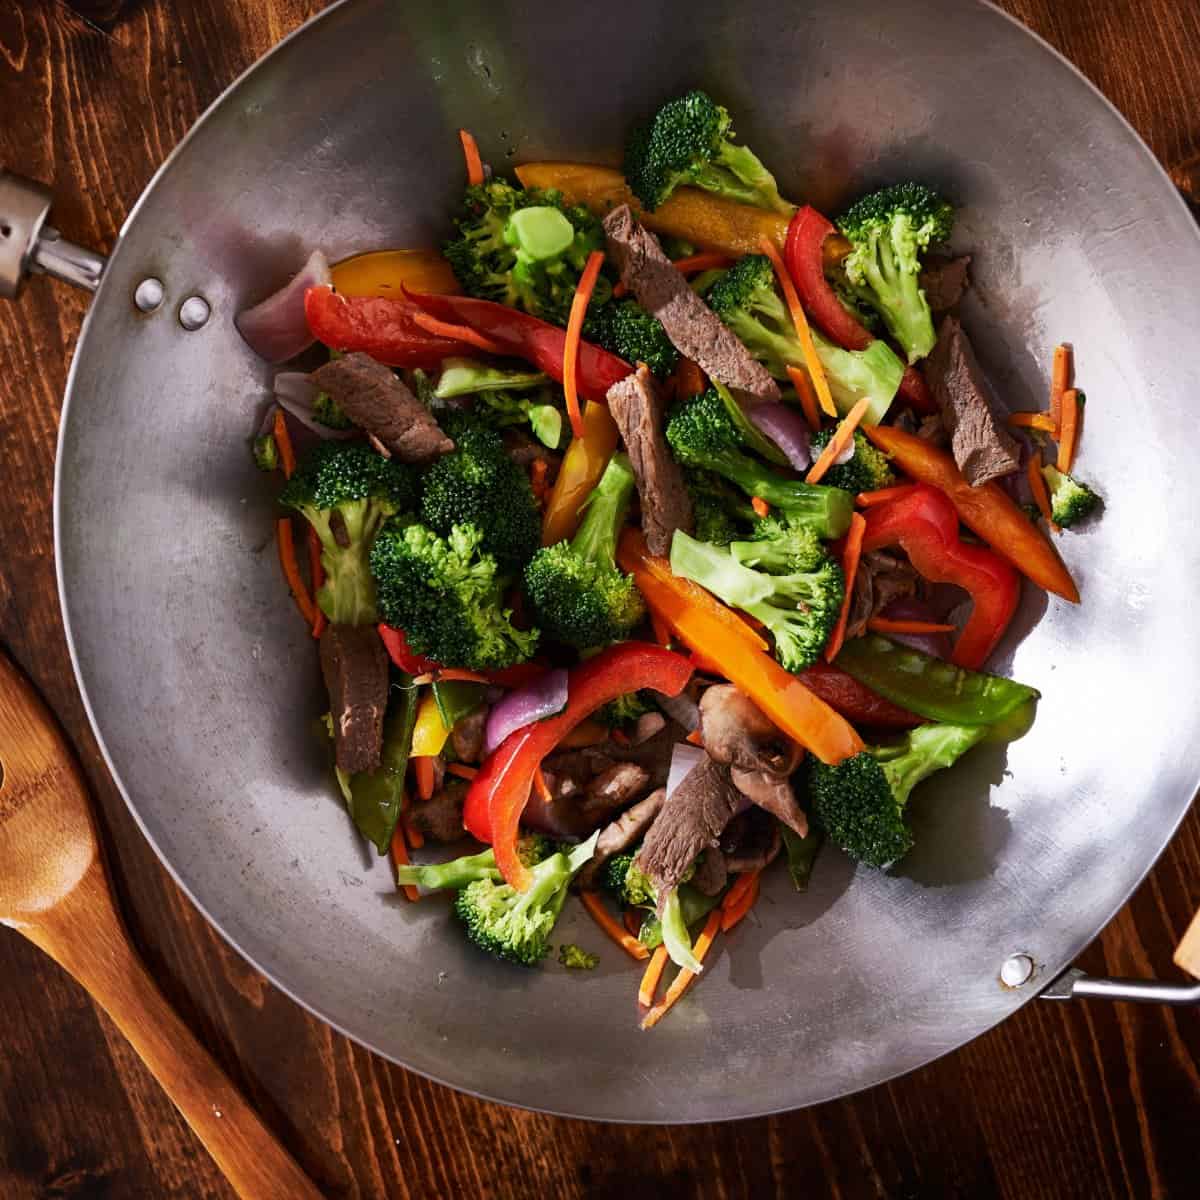 What is stir frying